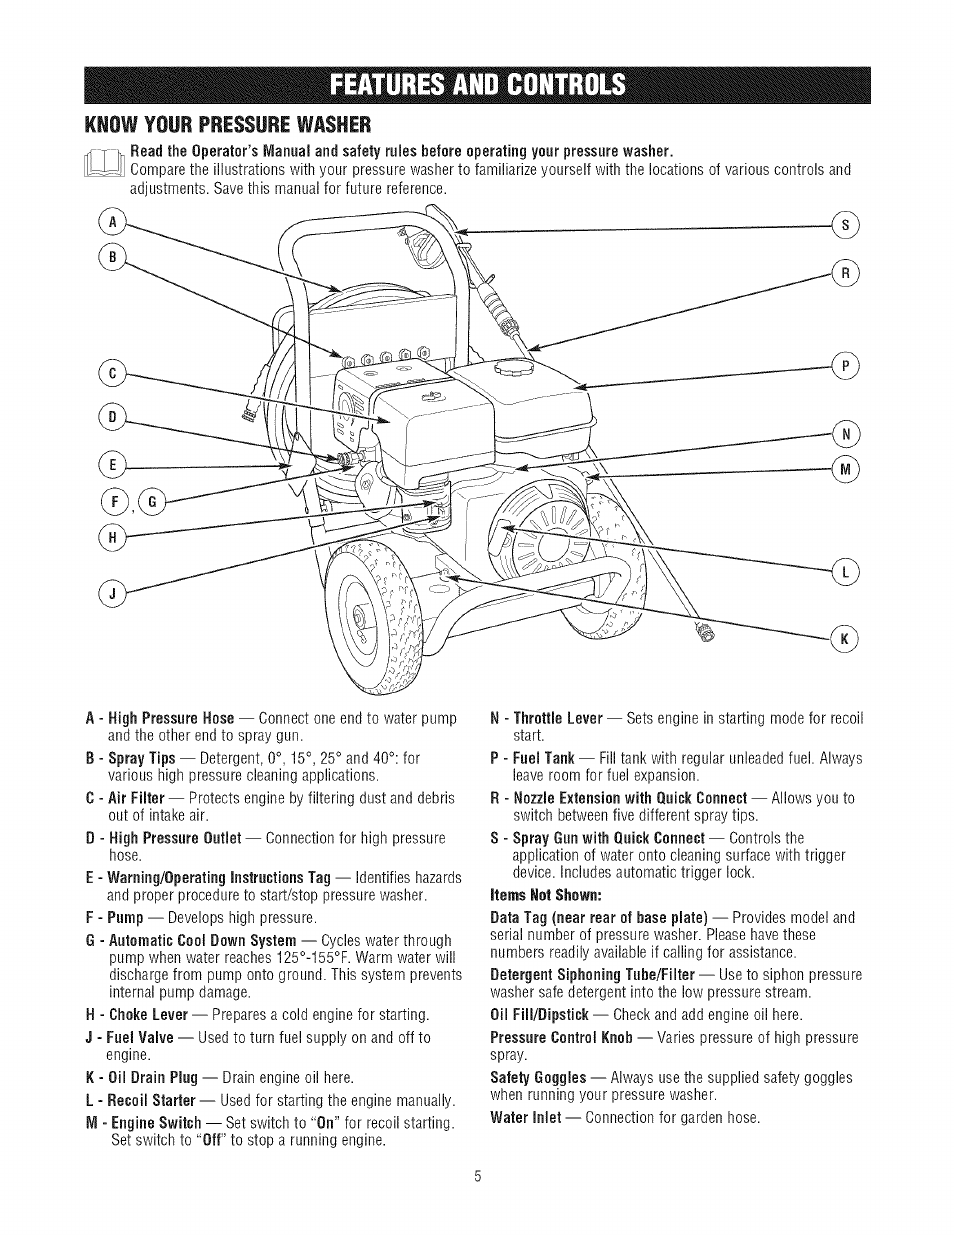 Features and controls, Know your pressure washer | Craftsman 580.752300